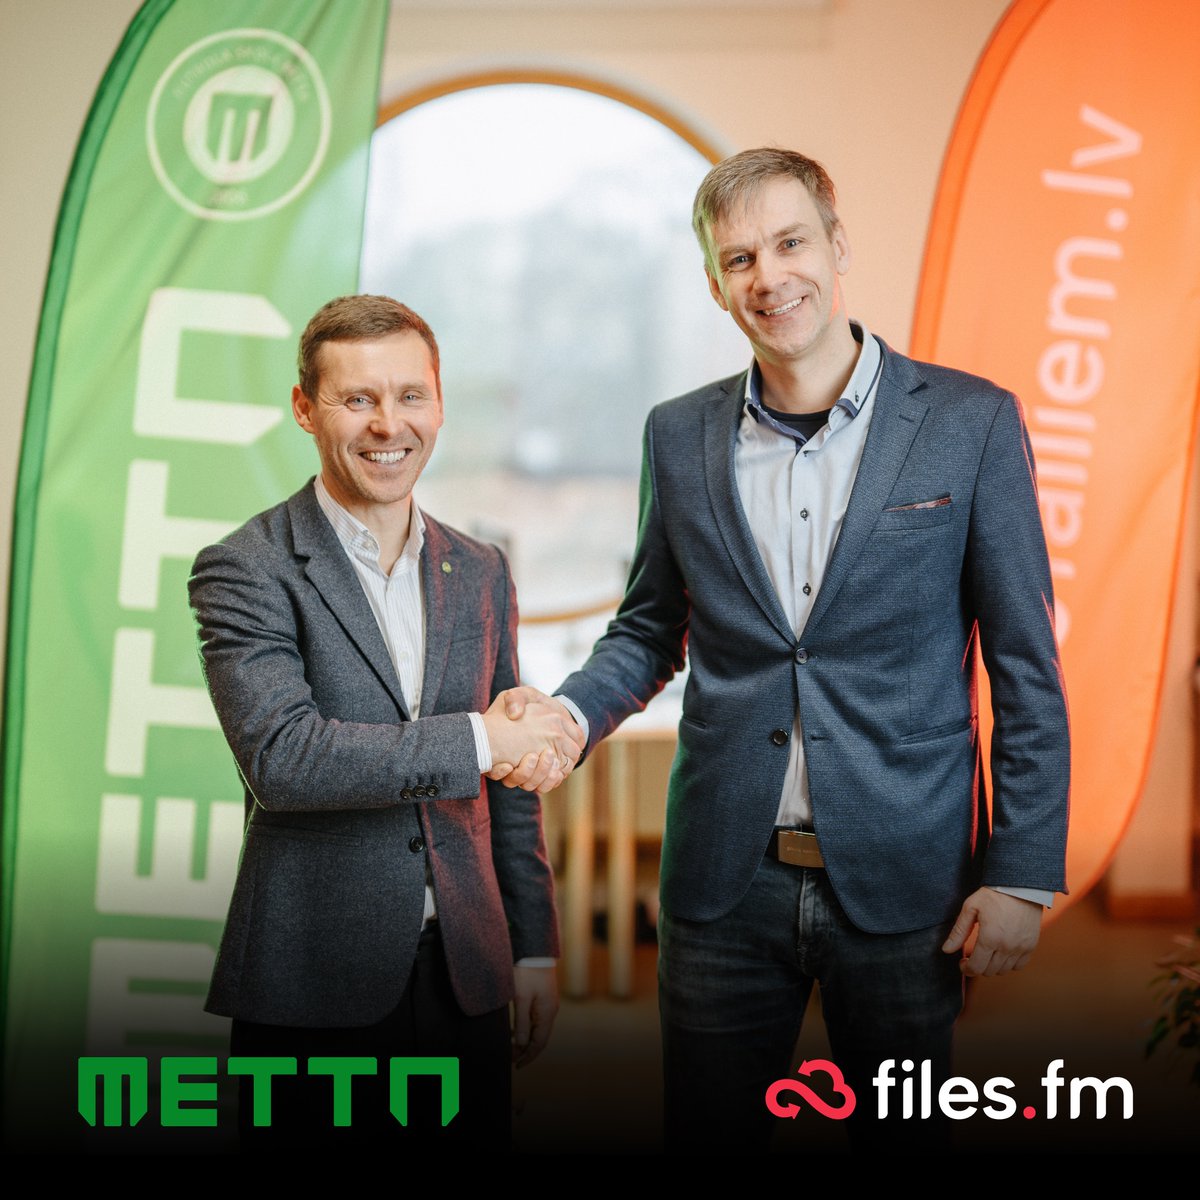 ⚽🤝 We are thrilled to announce our partnership with @FSMETTA , Latvia's largest football school! 👉🏻 Check out the Metta public gallery for the best shots of games and events: files.fm/metta